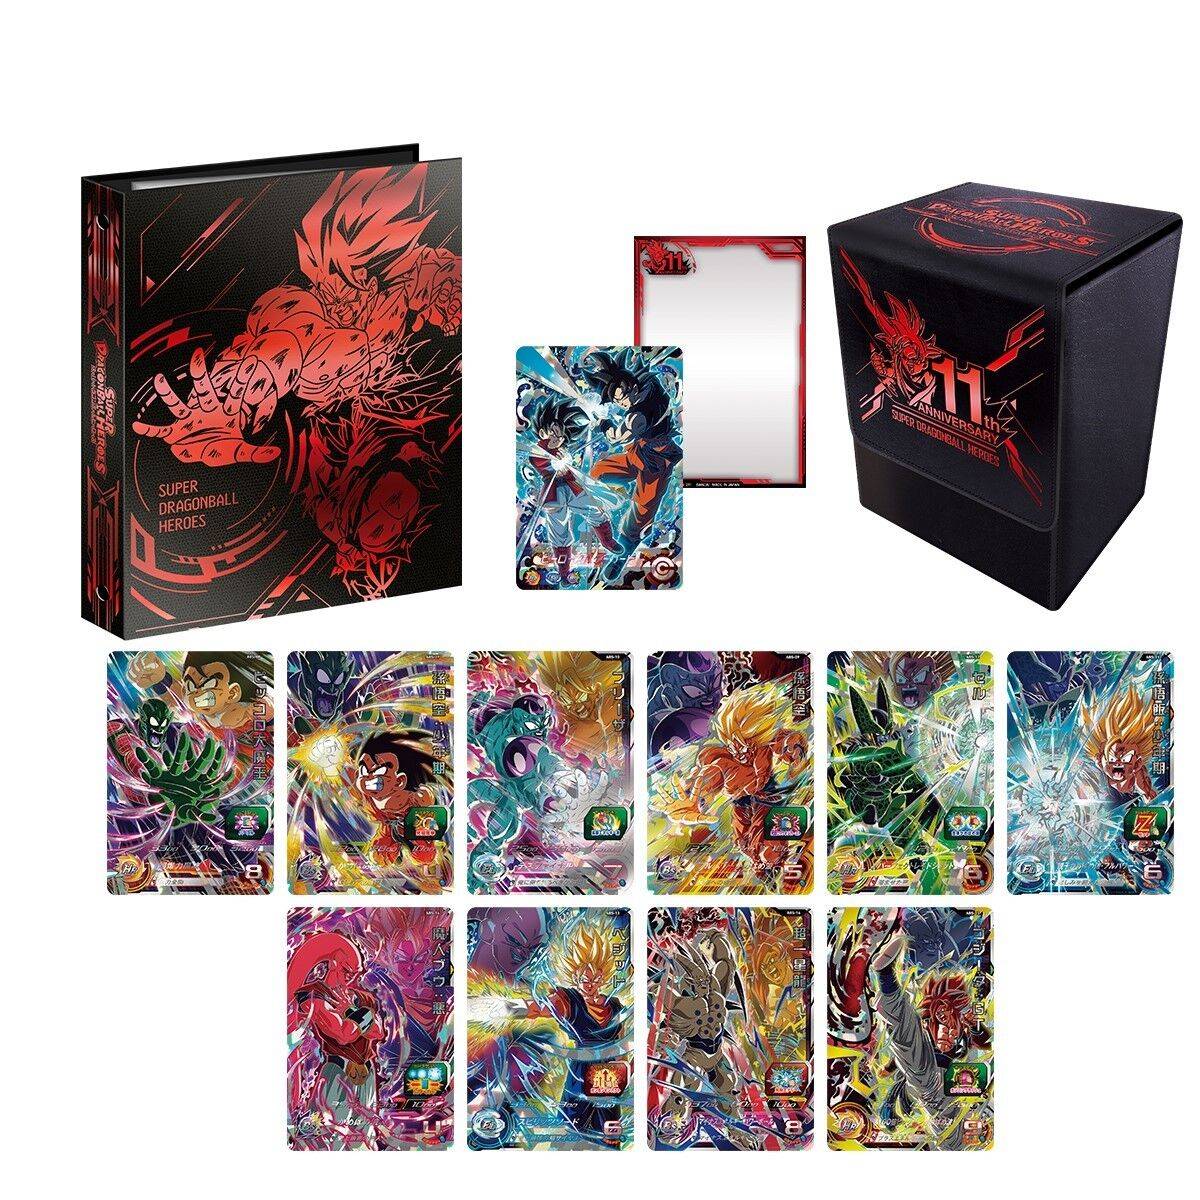 Super Dragon Ball Heroes: 11th ANNIVERSARY SPECIAL SET 